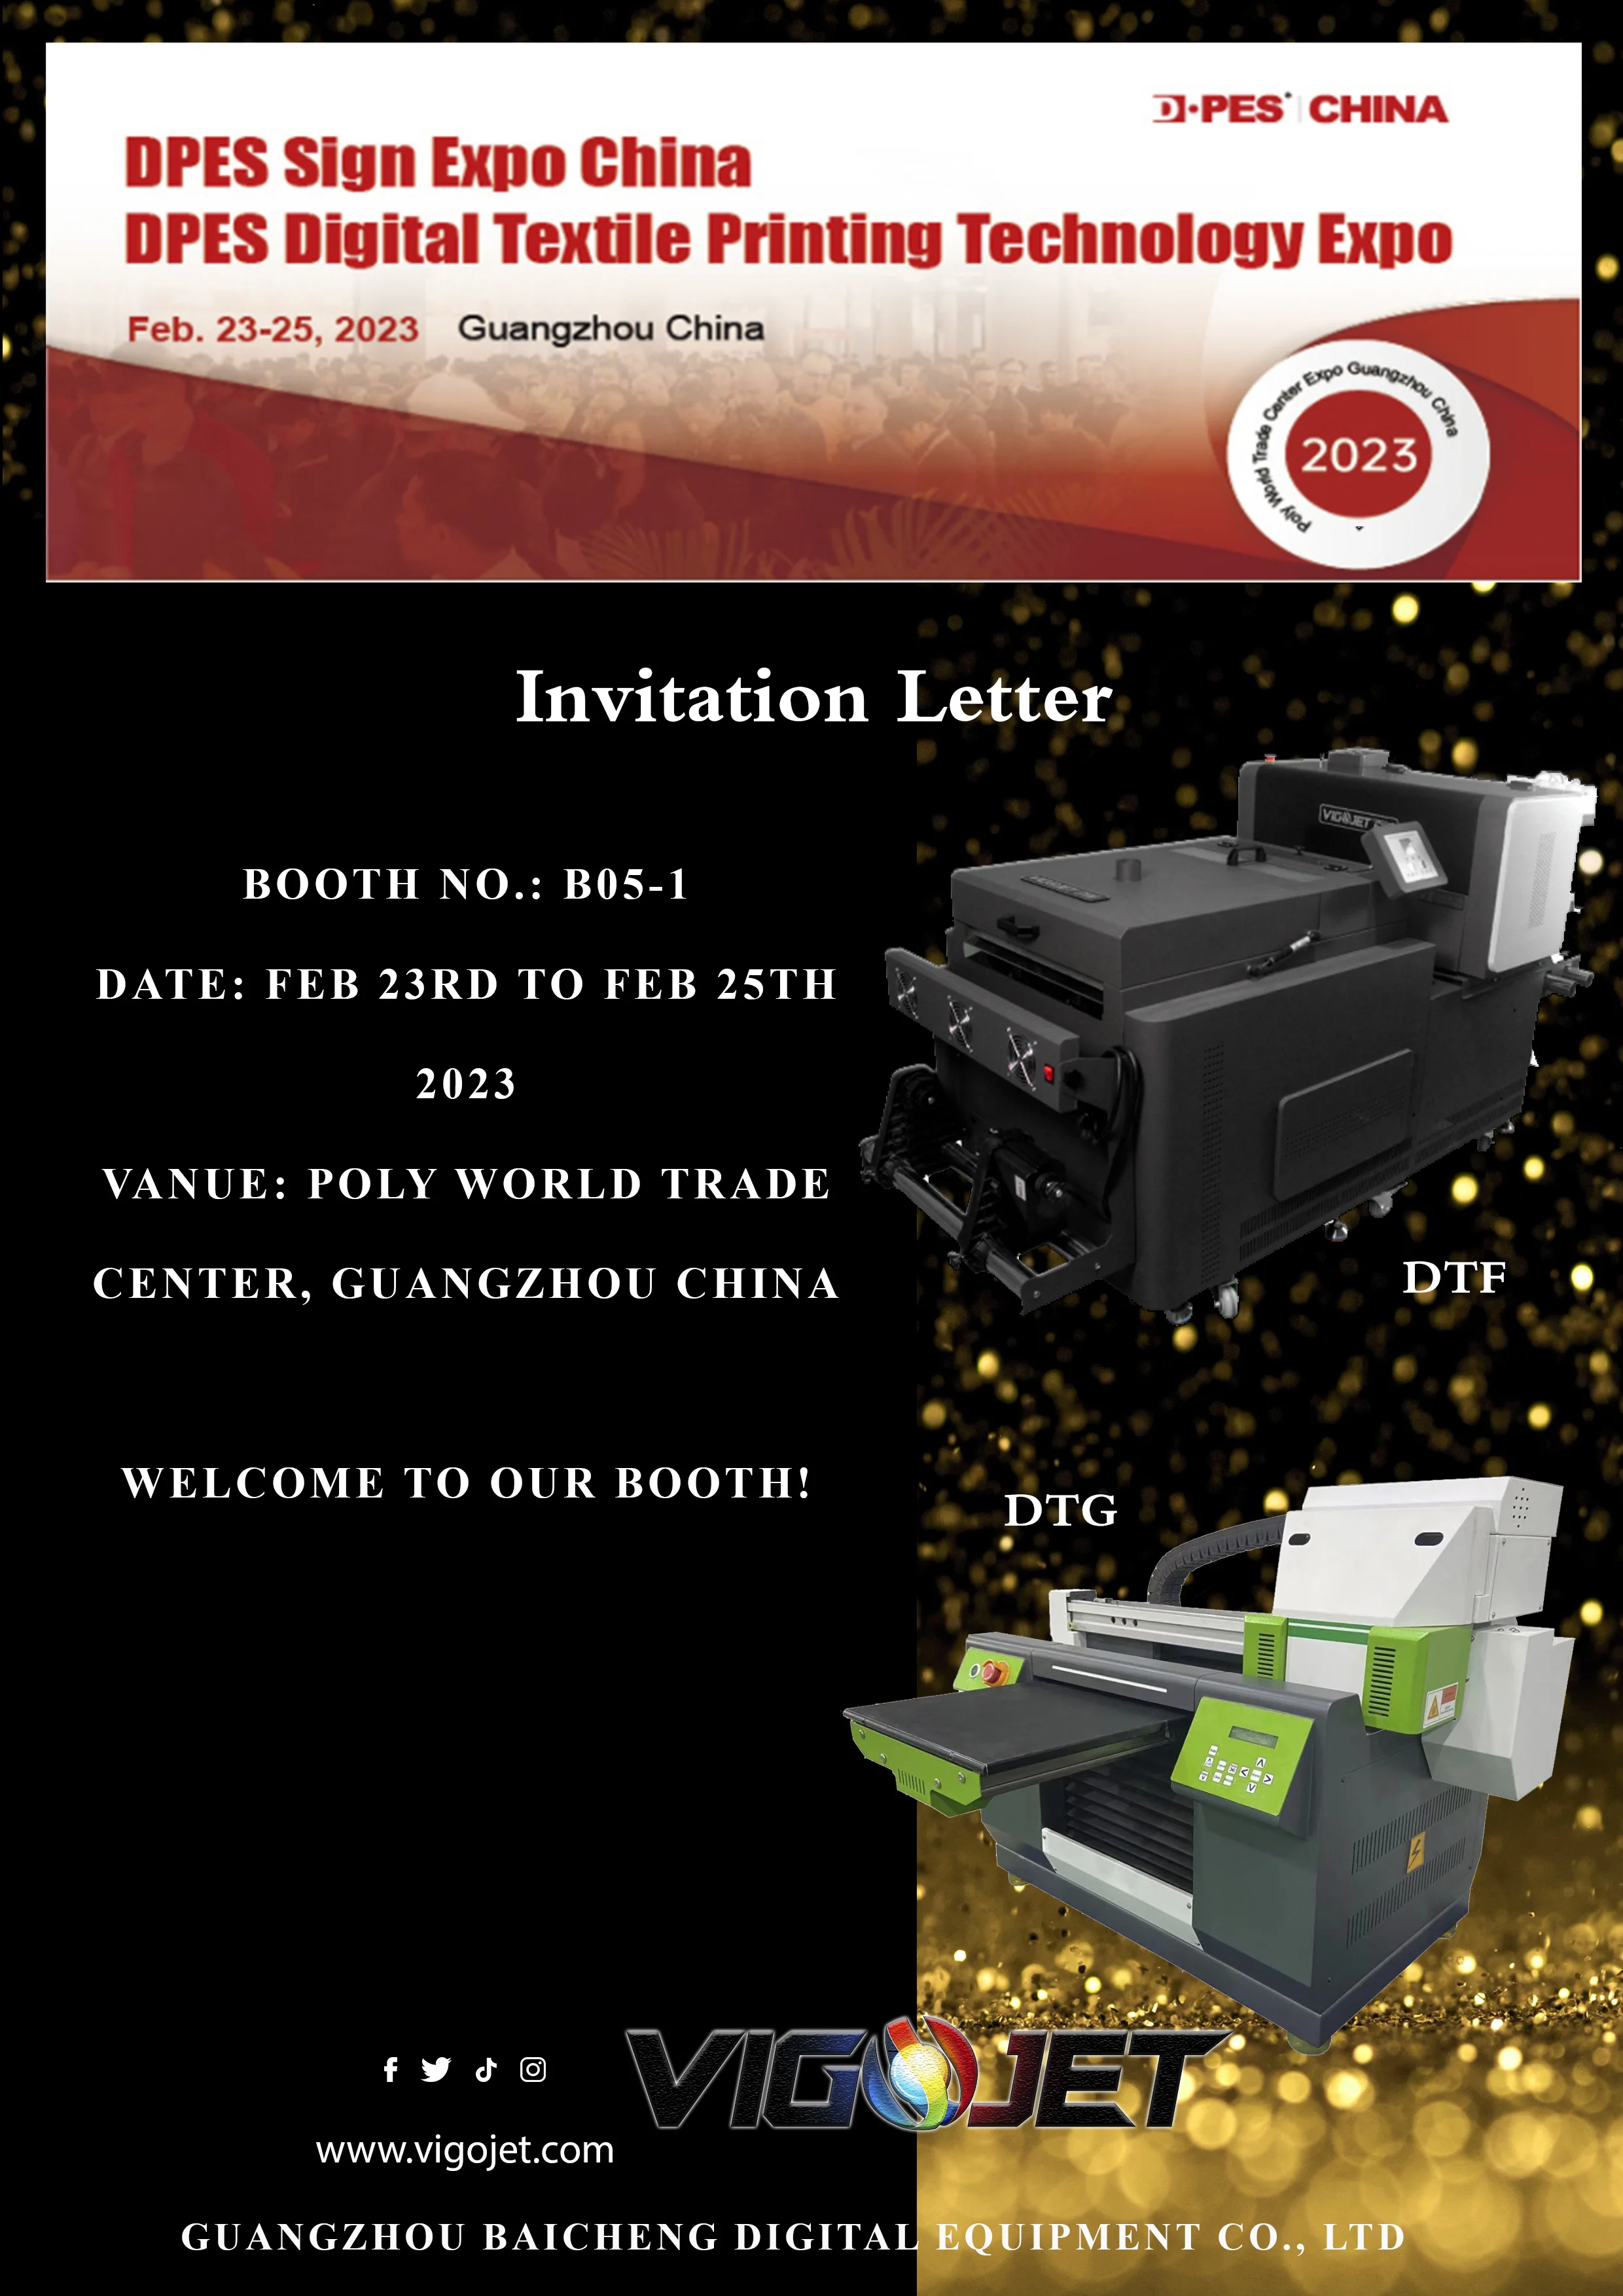 DPES SIGN Expo  DPES Textile Printing Technology Expo China 2023